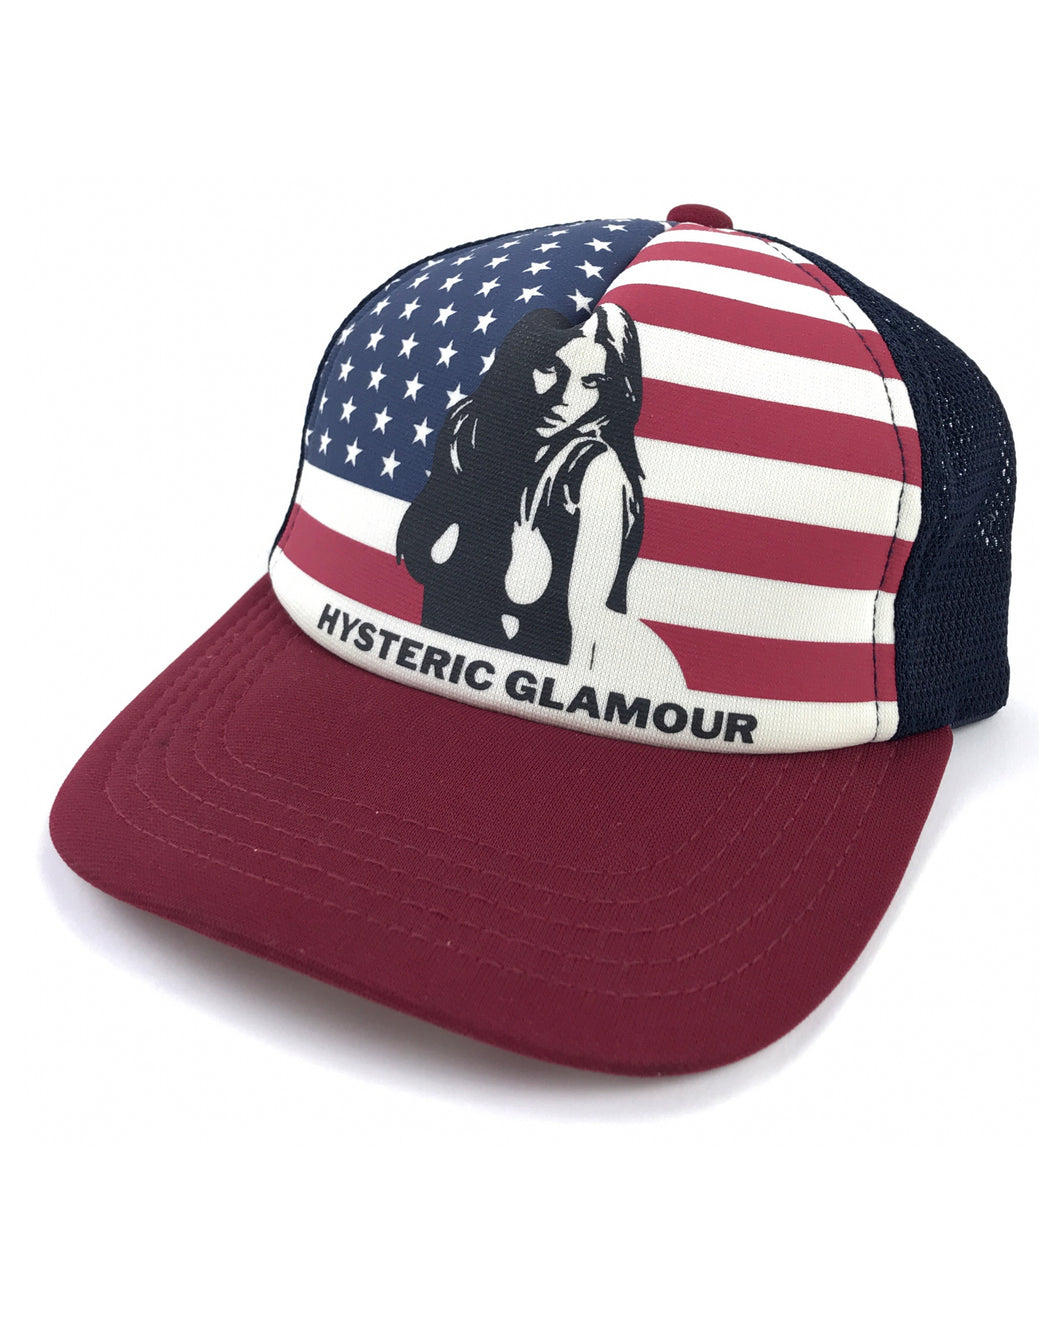 HYSTERIC GLAMOUR American Flag Trucker Hat